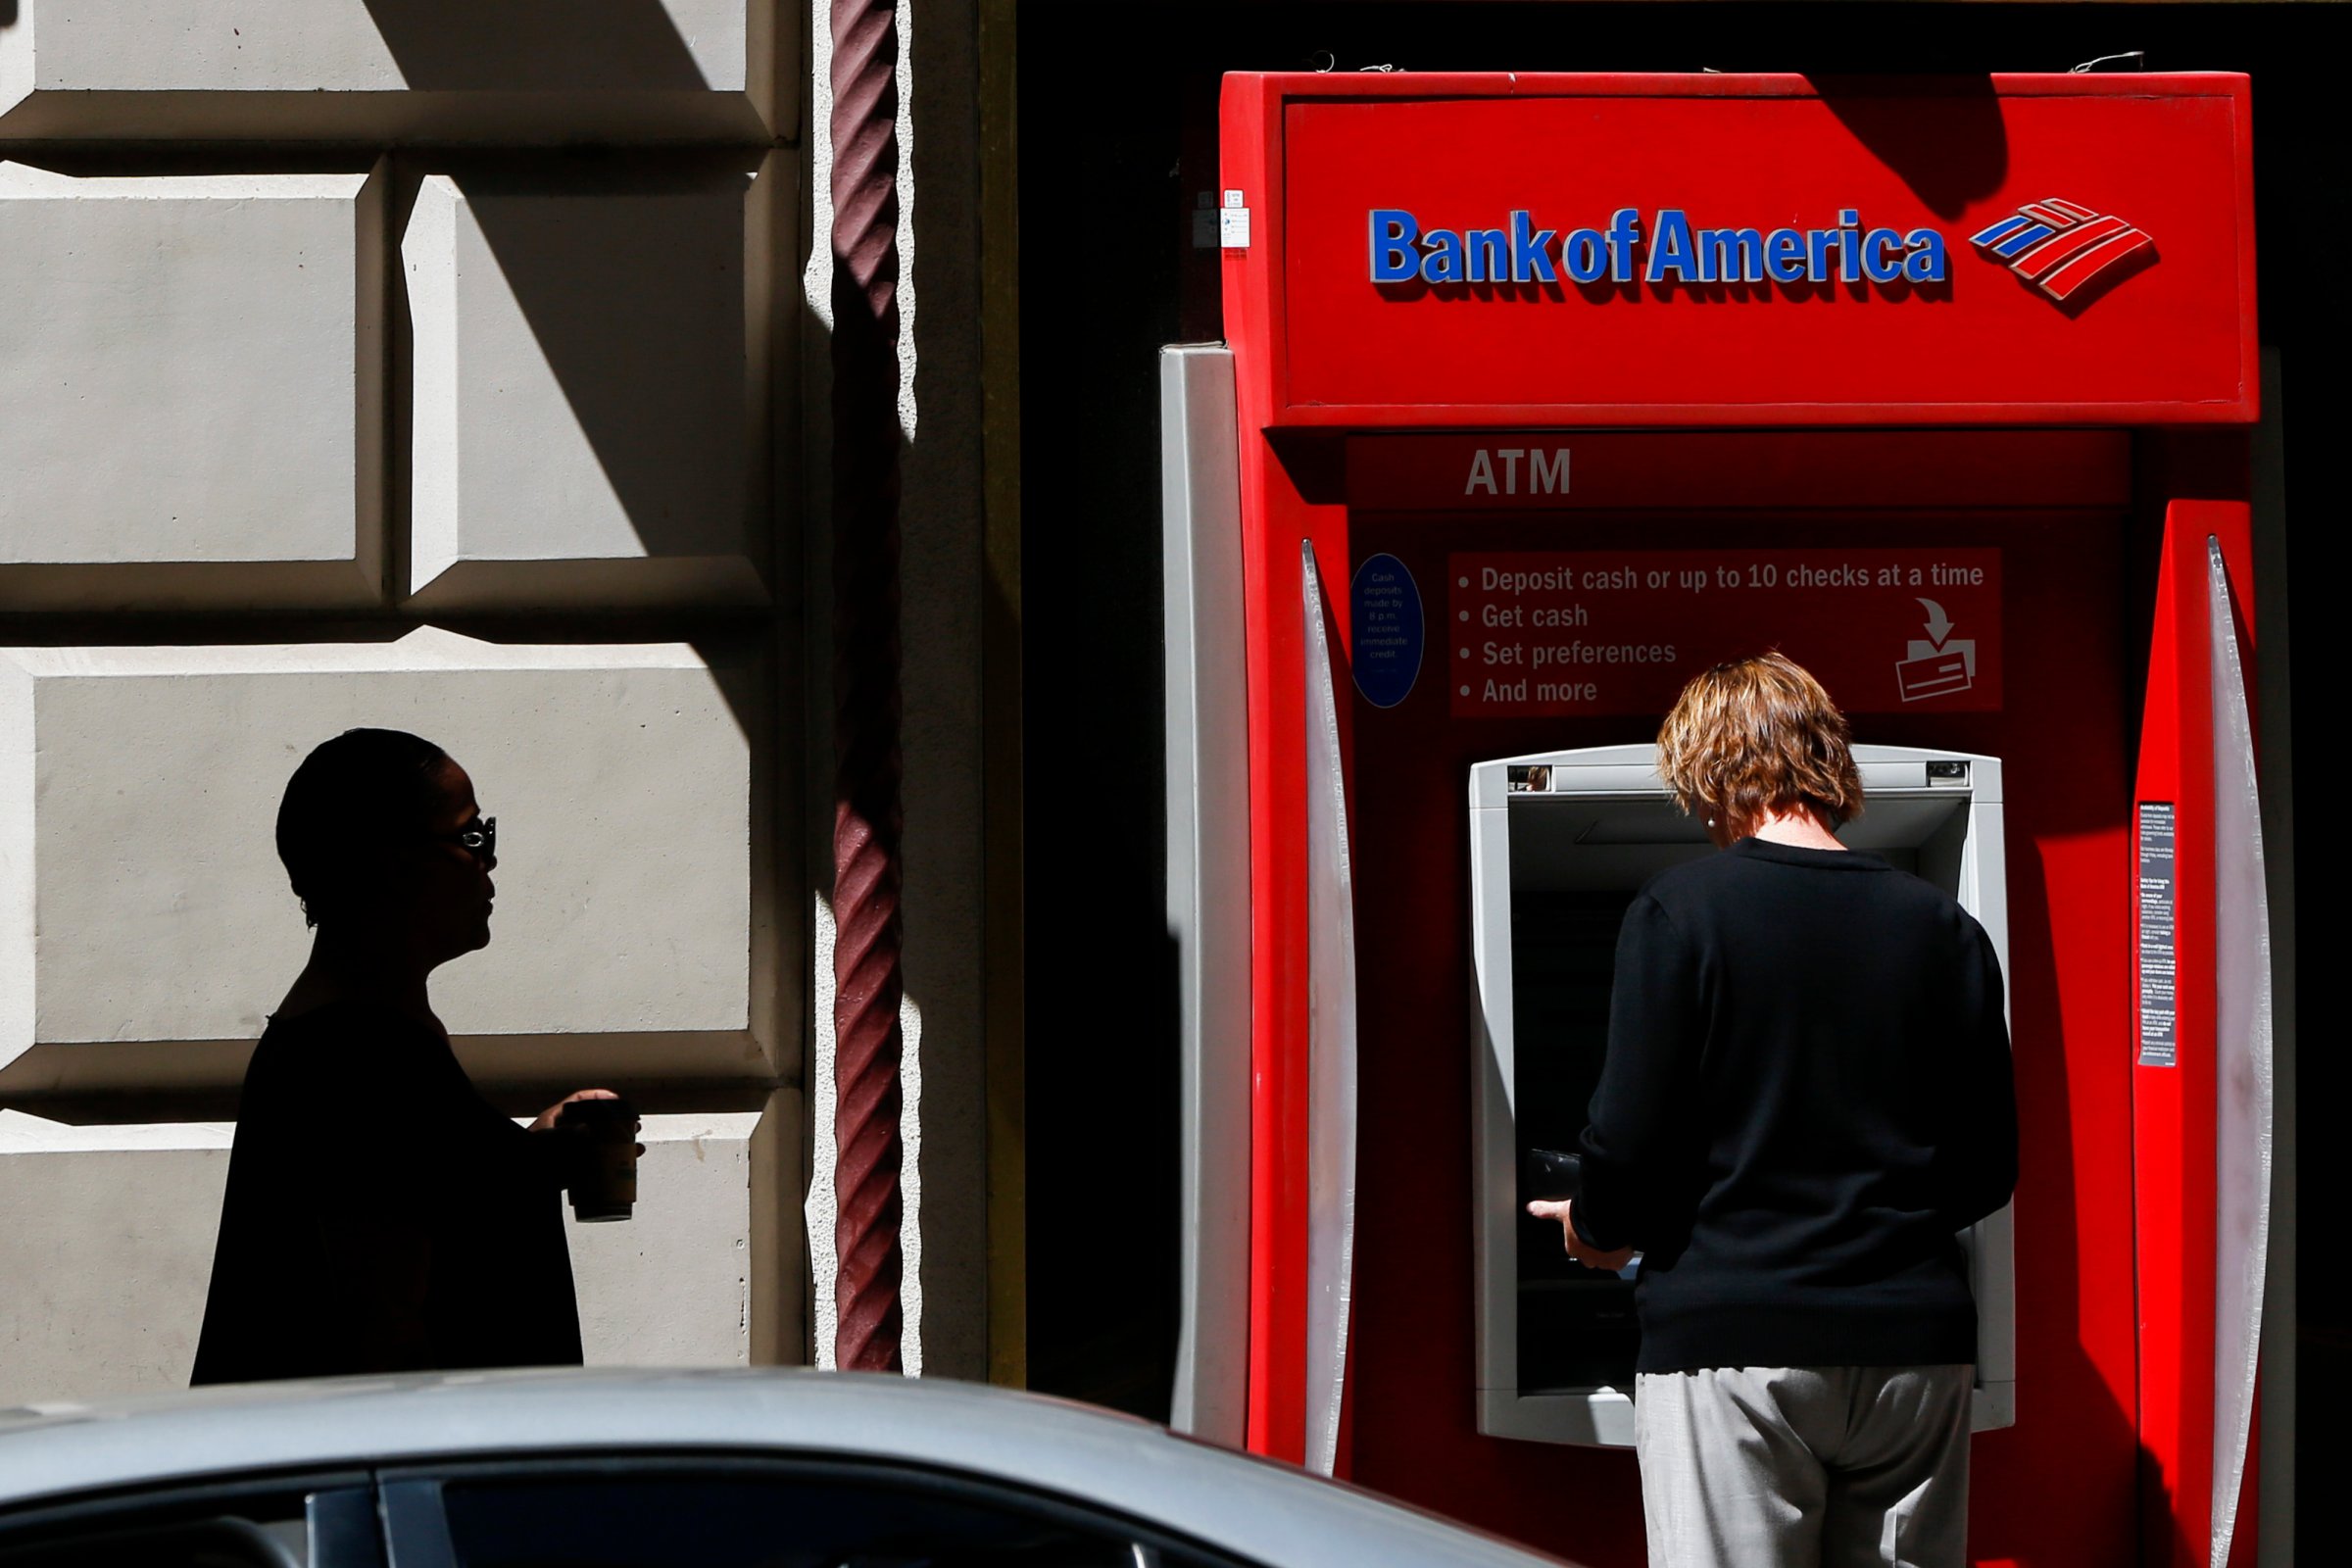 A woman uses a a Bank of America Corp. ATM outside of a branch in Los Angeles, California, U.S., on Monday, July 13, 2015. Photographer: Patrick T. Fallon/Bloomberg